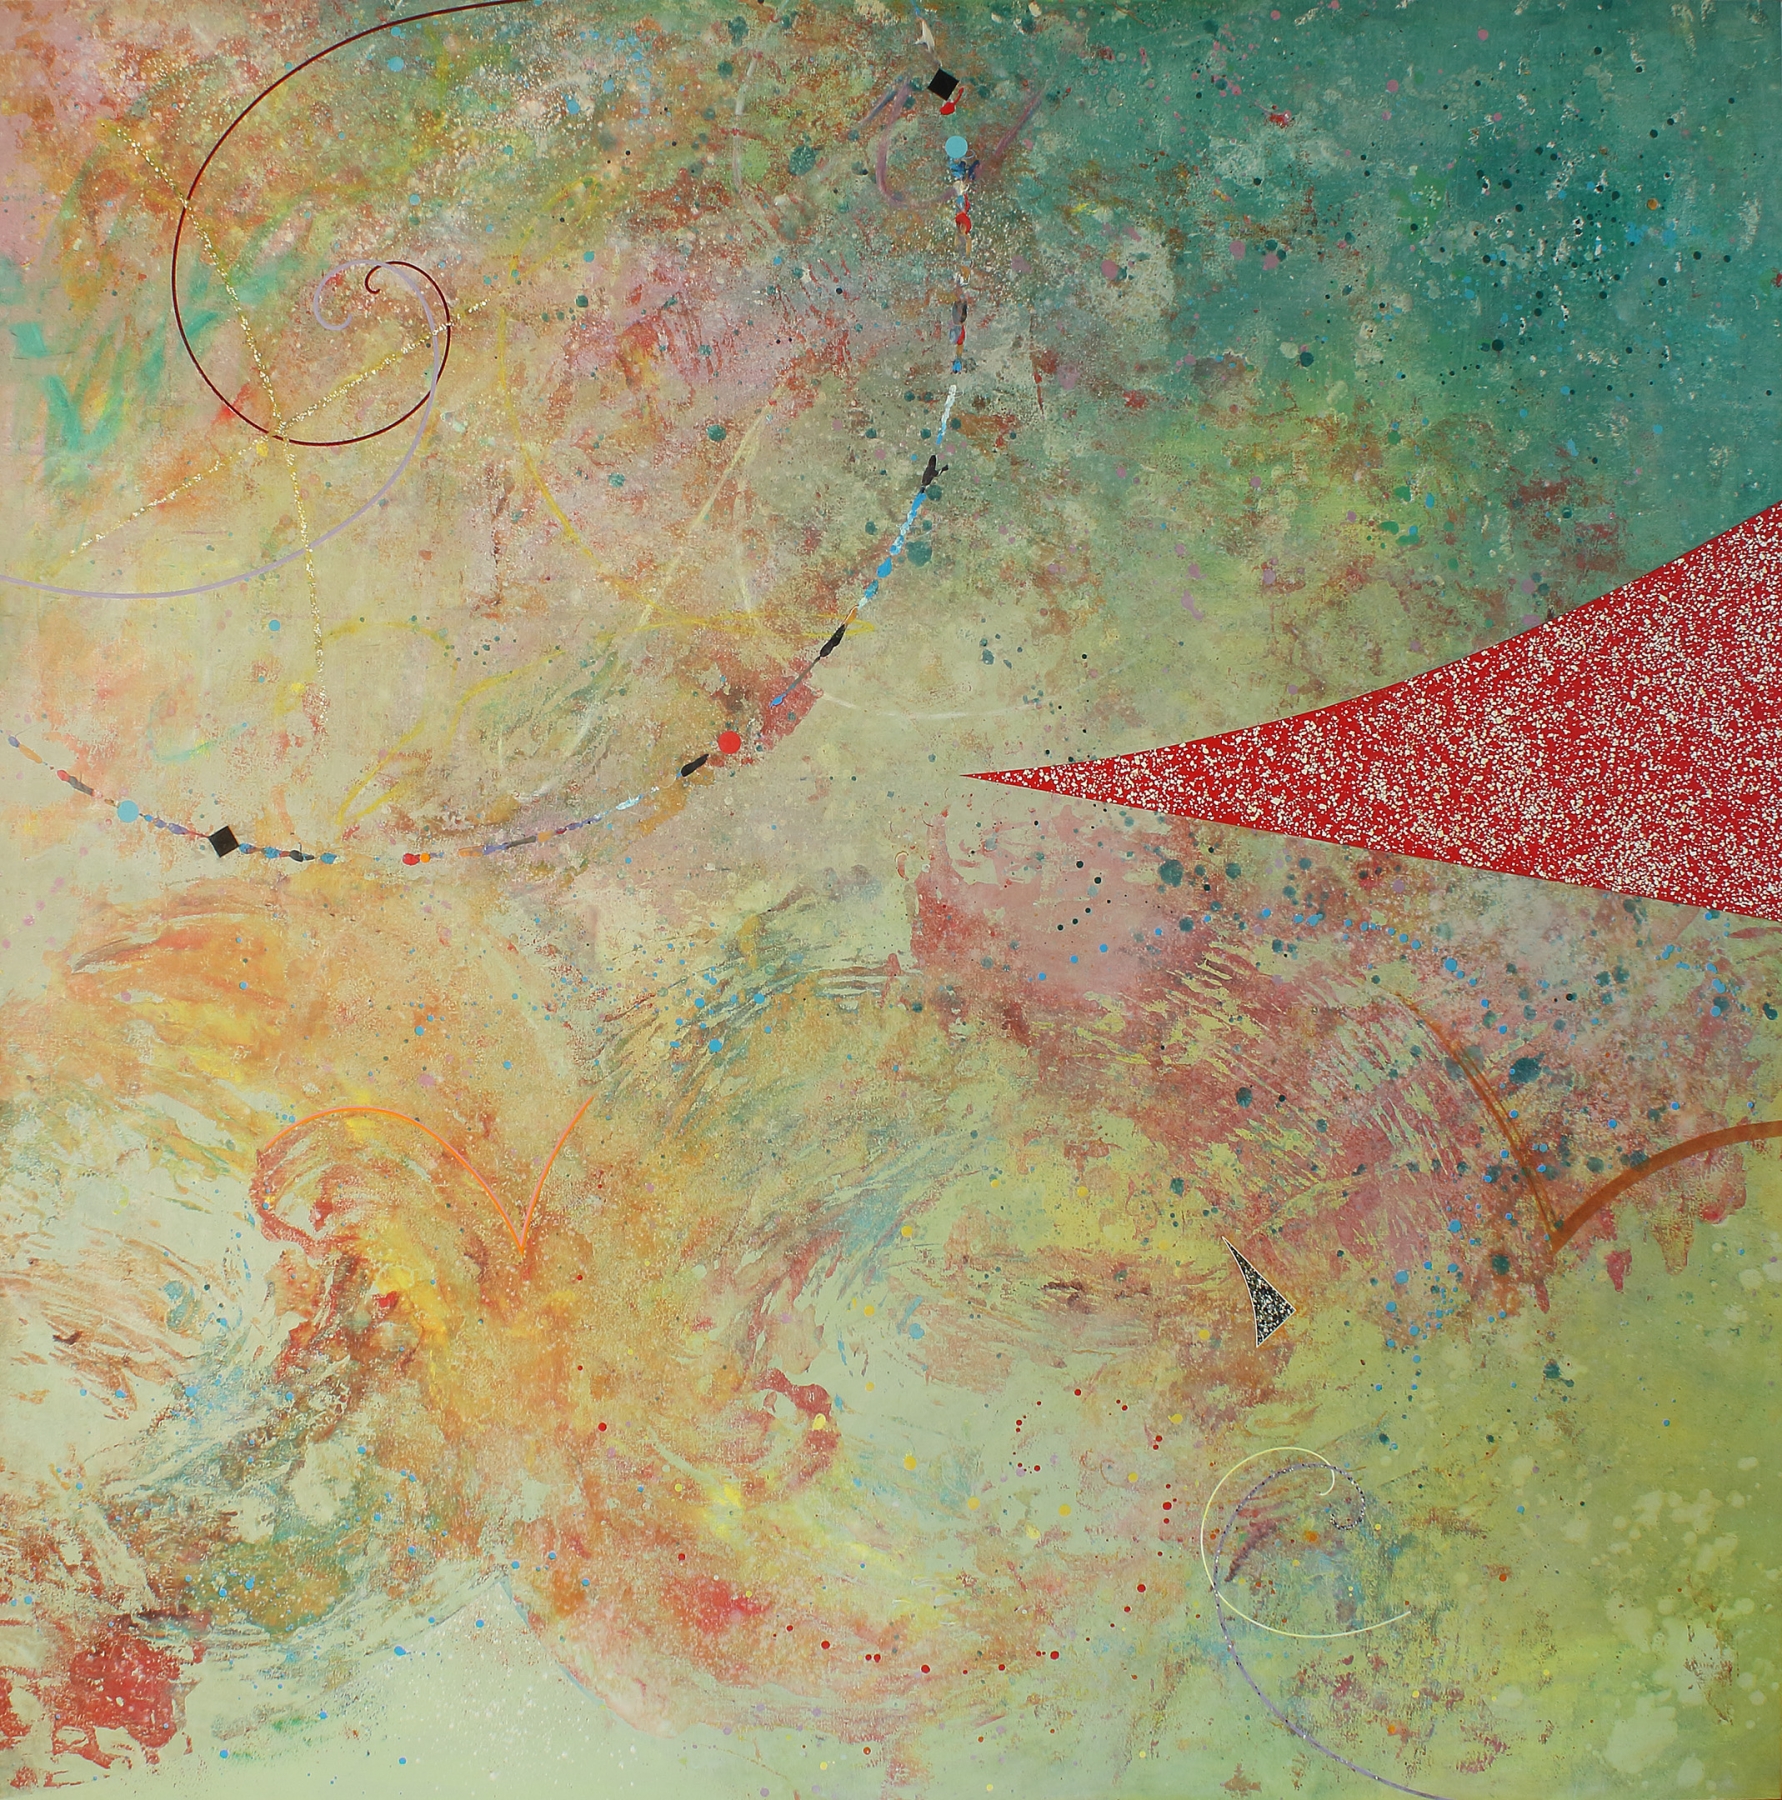 Out Come Out, 1980, oil, isobutyl methacrylate, pastel, mica, eggshell and sand on linen, 80 x 80 inches